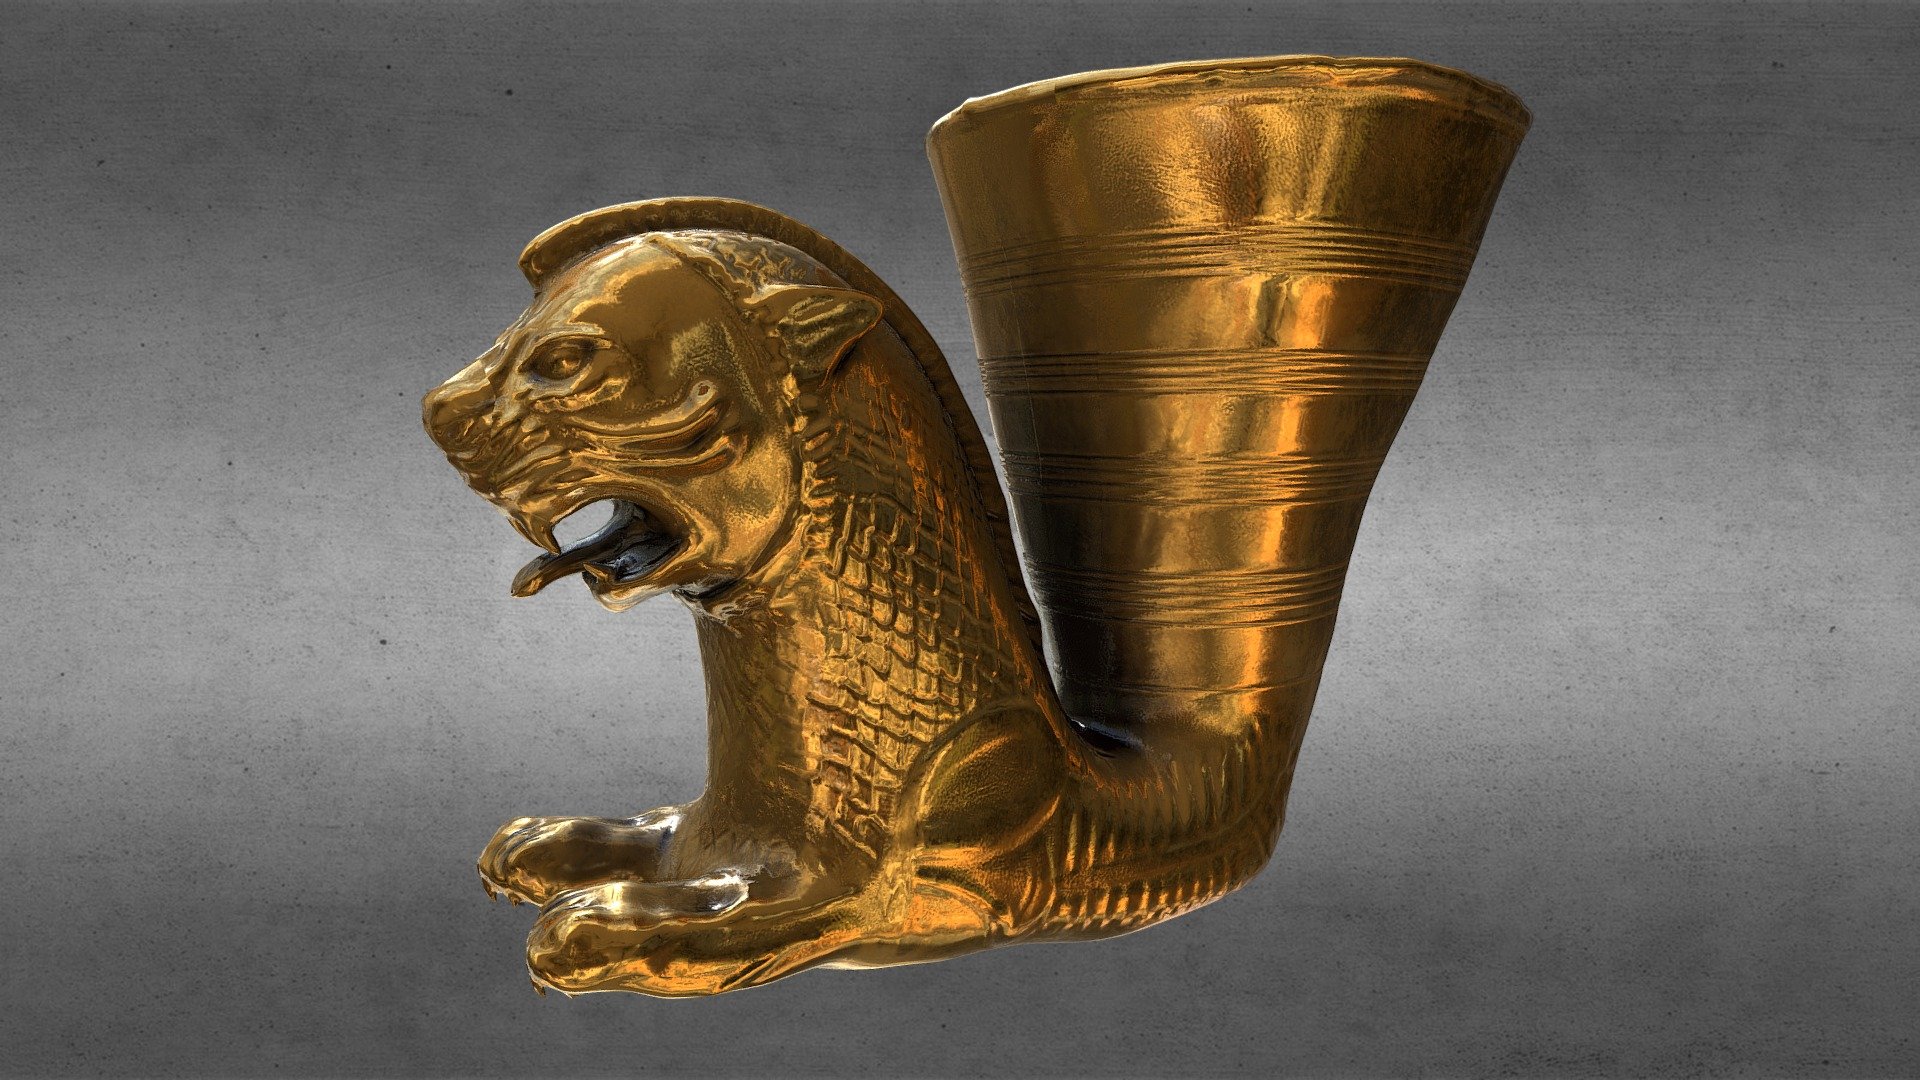 Achaemenid golden cup

A beautiful ancient cup from the Achaemenid period of Iran. This beautiful cup is made of gold. I made this model in 3dsmax and it is fully optimized.

For buy: https://www.artstation.com/a/19712384 - Achaemenid golden cup - 3D model by VertXYZ 3d model